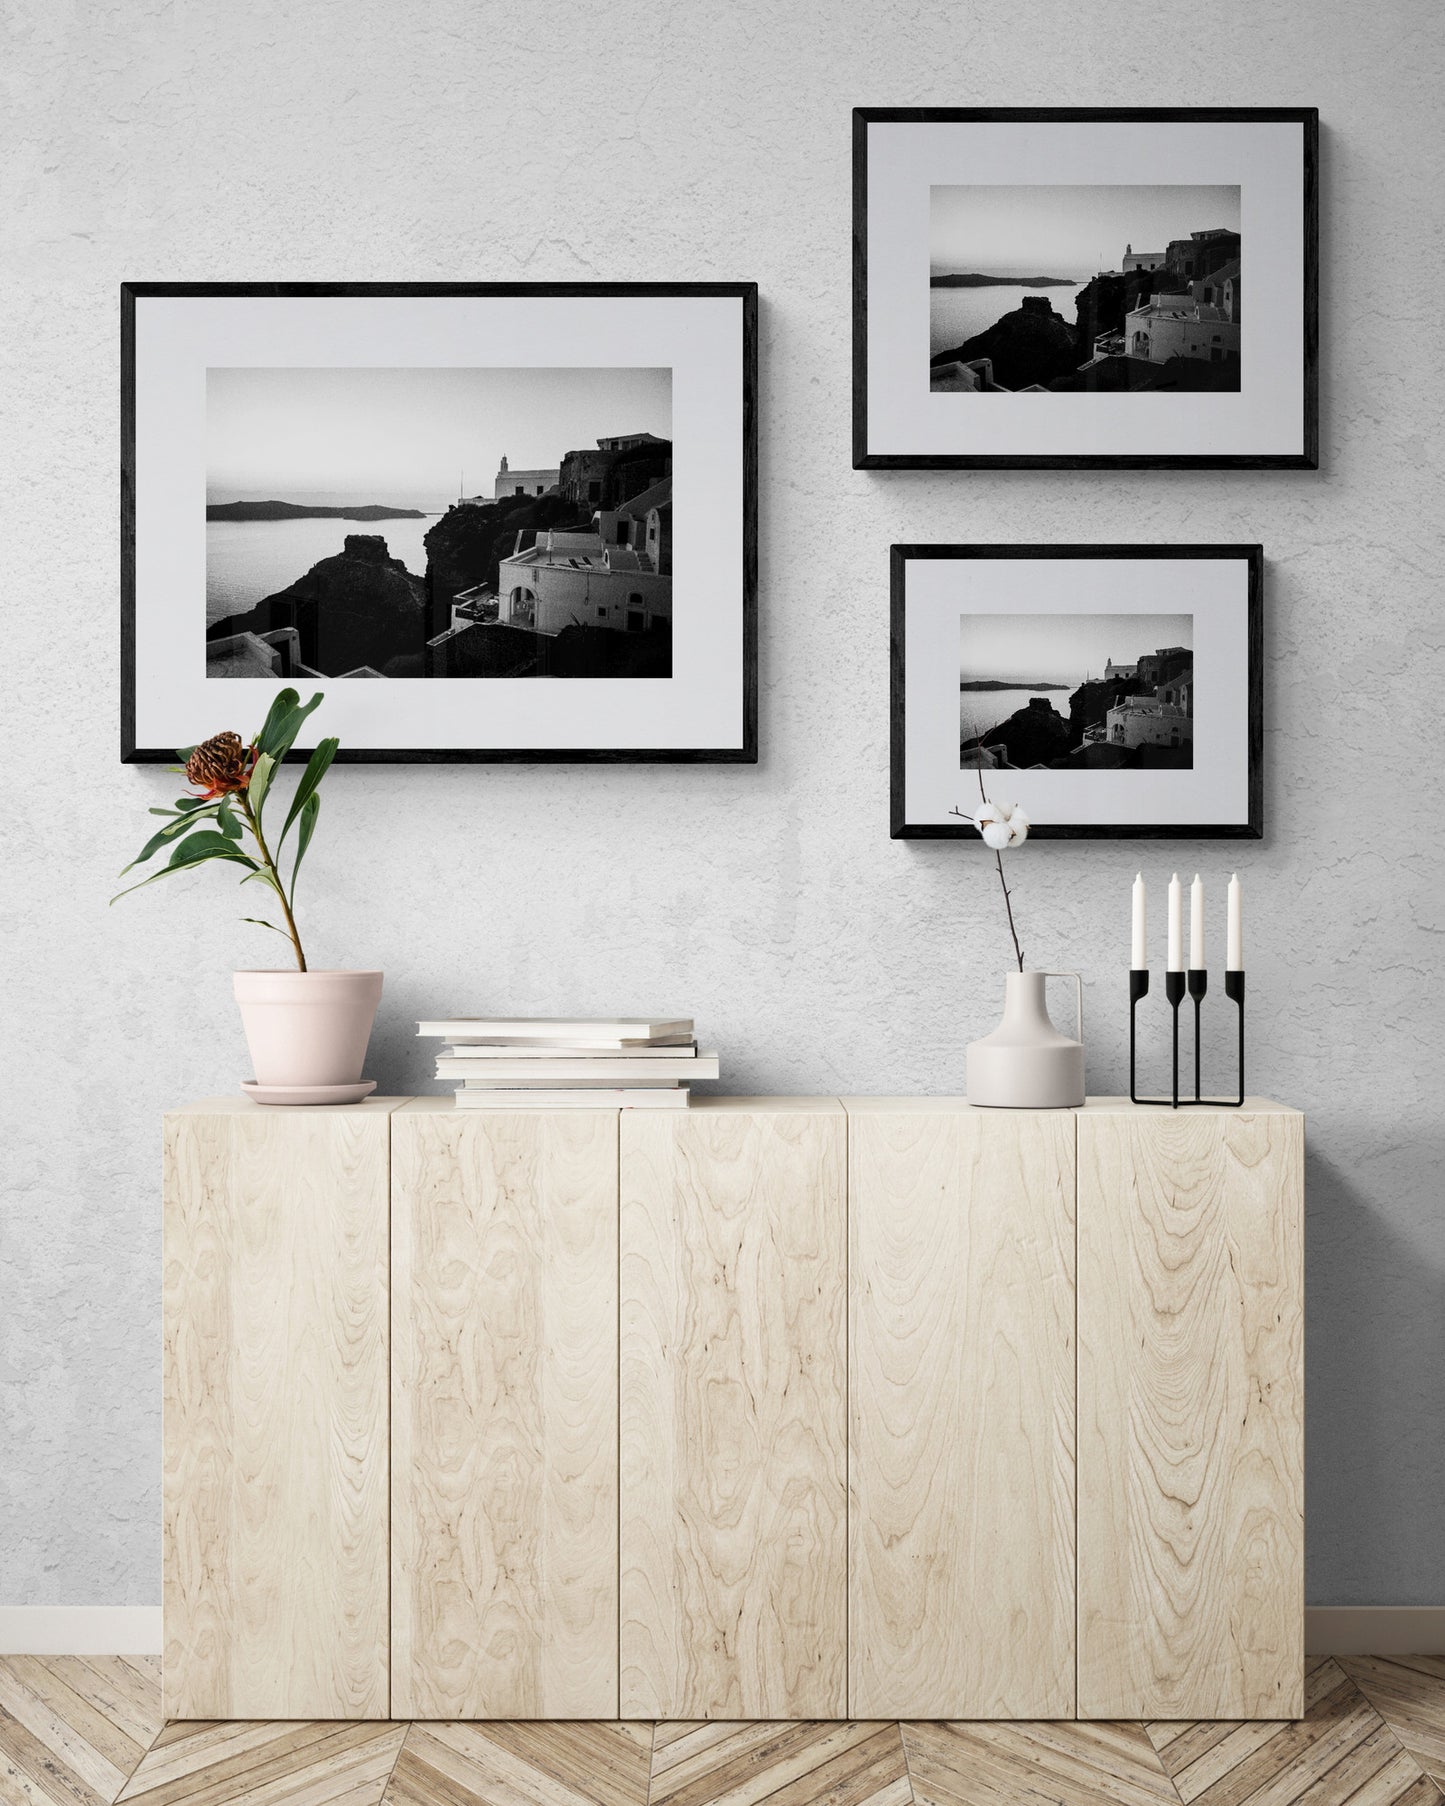 Rock in Oia | Santorini | Chorōs | Black-and-white wall art photography from Greece - framing options